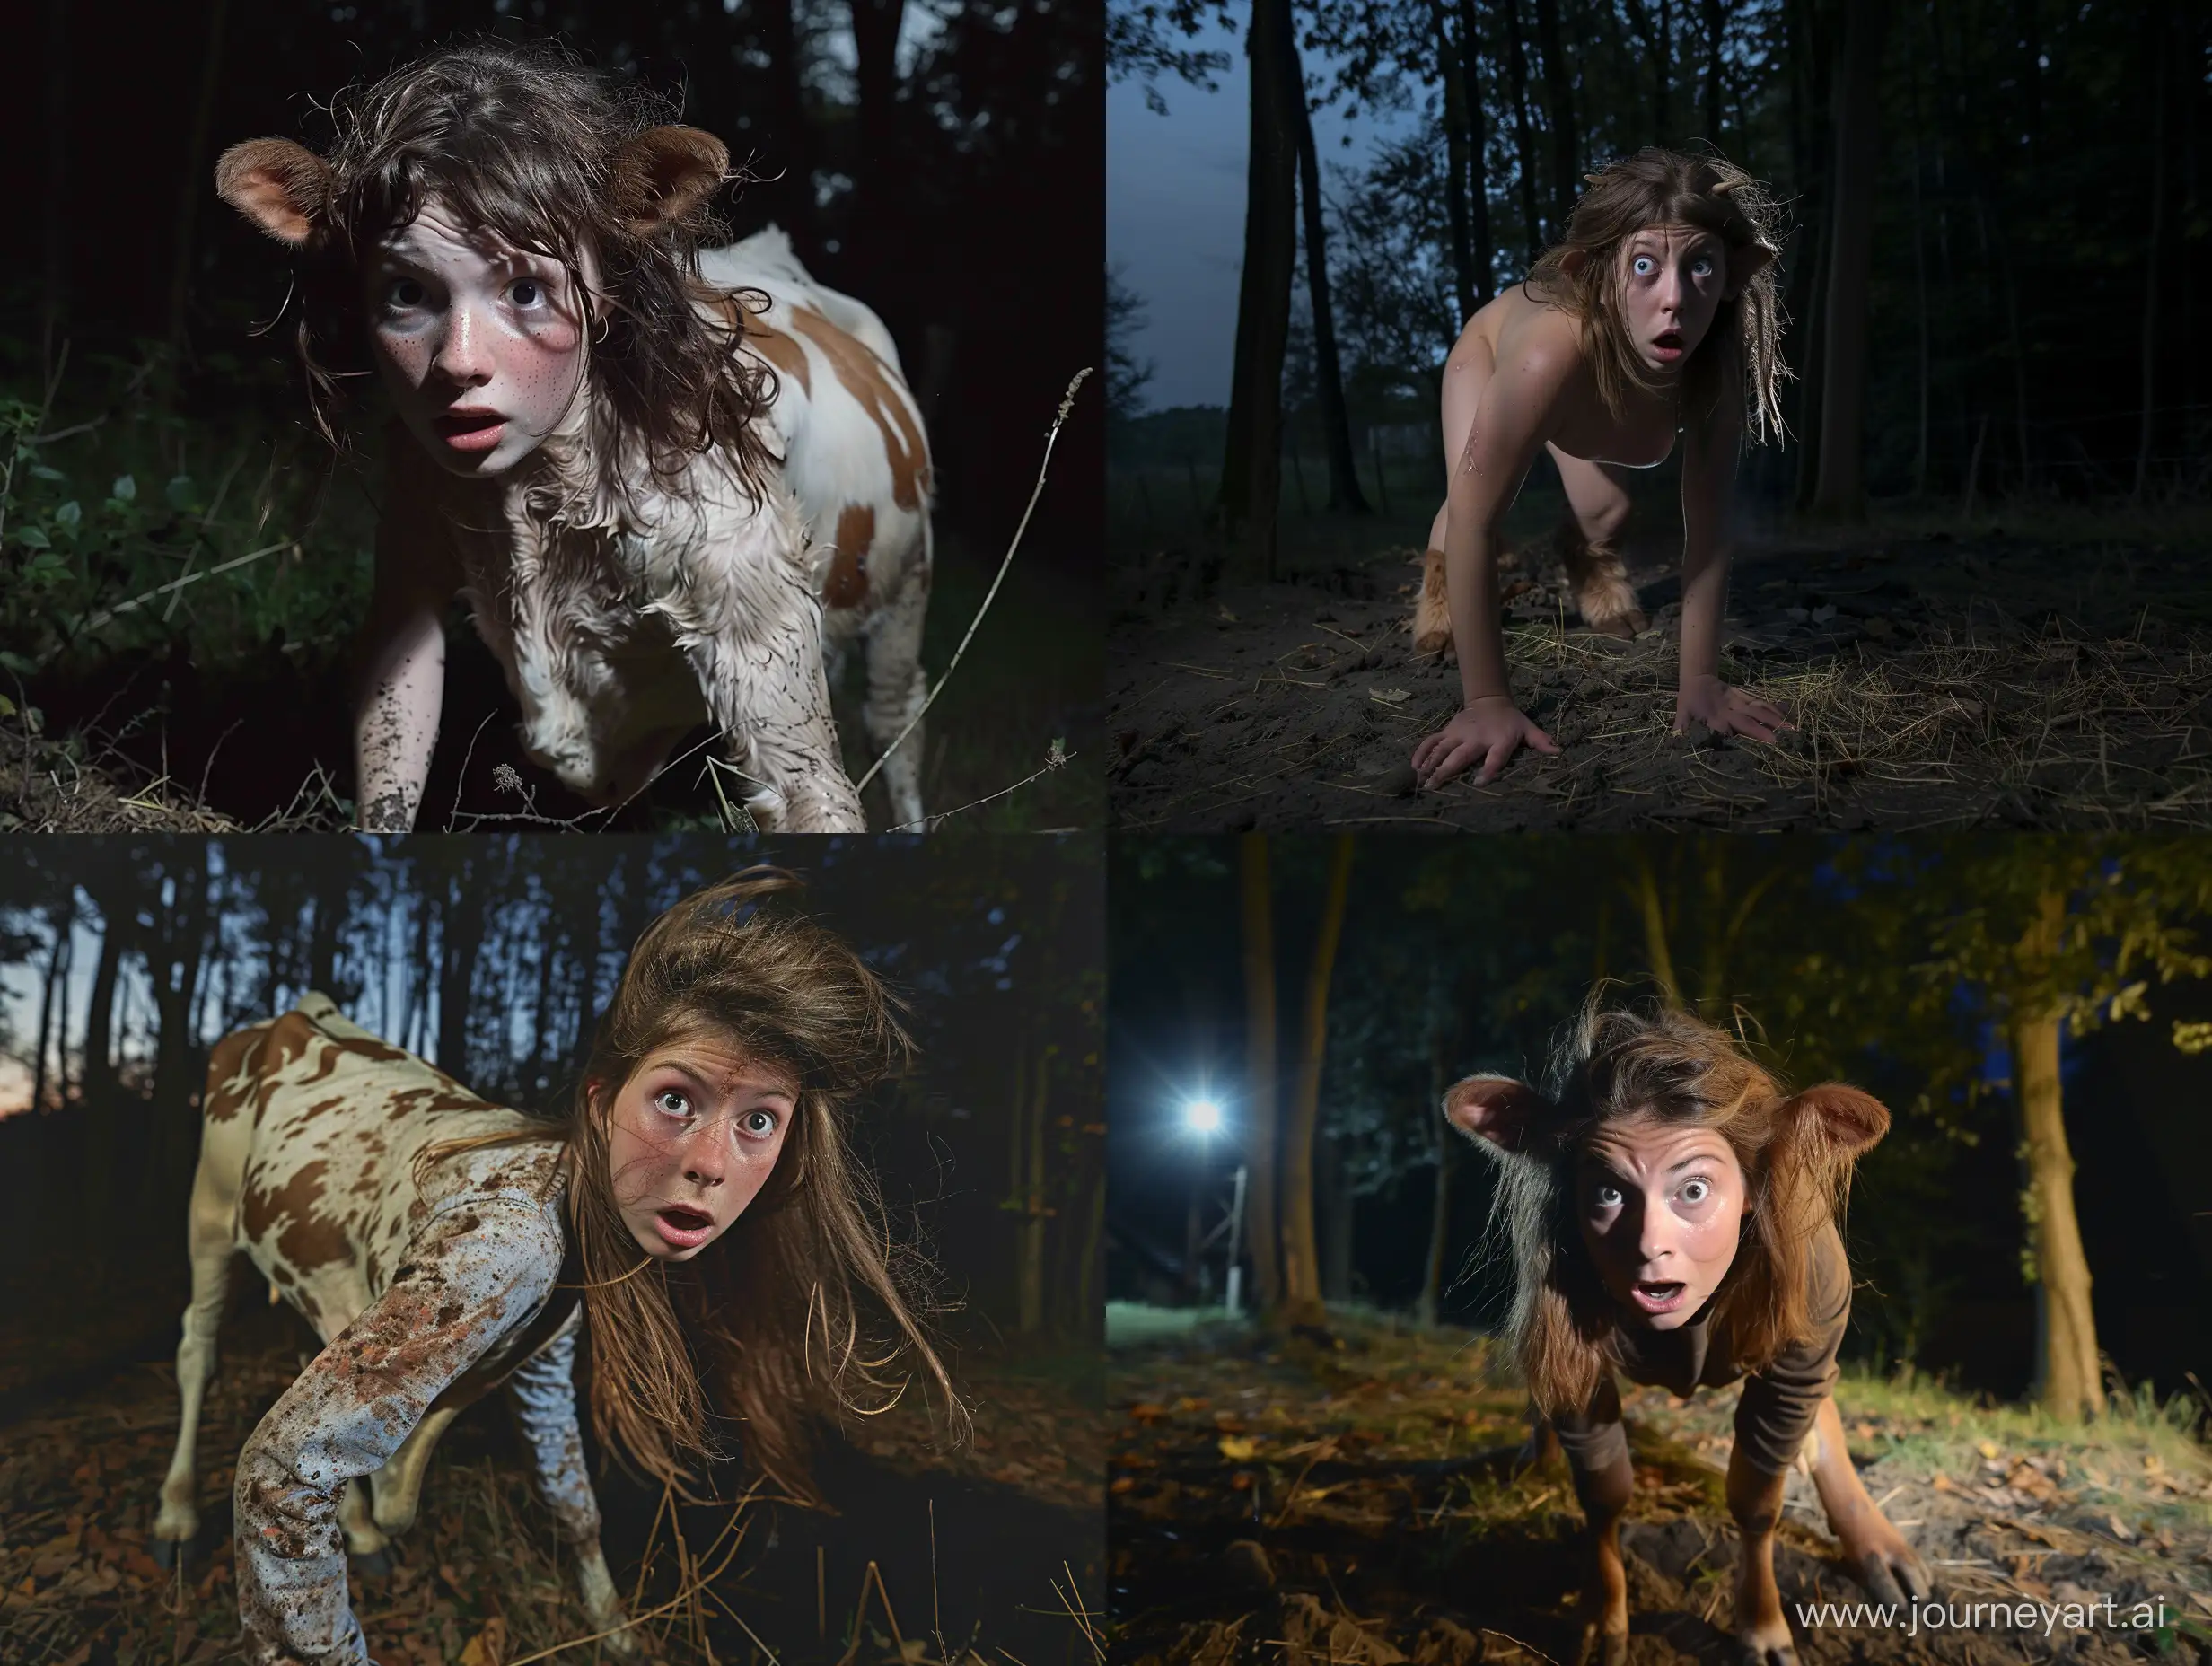 A young woman with loose brown hair, who has been transformed into a cow. The photo is taken while the transformation is almost completed. She is standing on all fours in a forest at night. She has a scared expression. Realistic photograph, full body picture